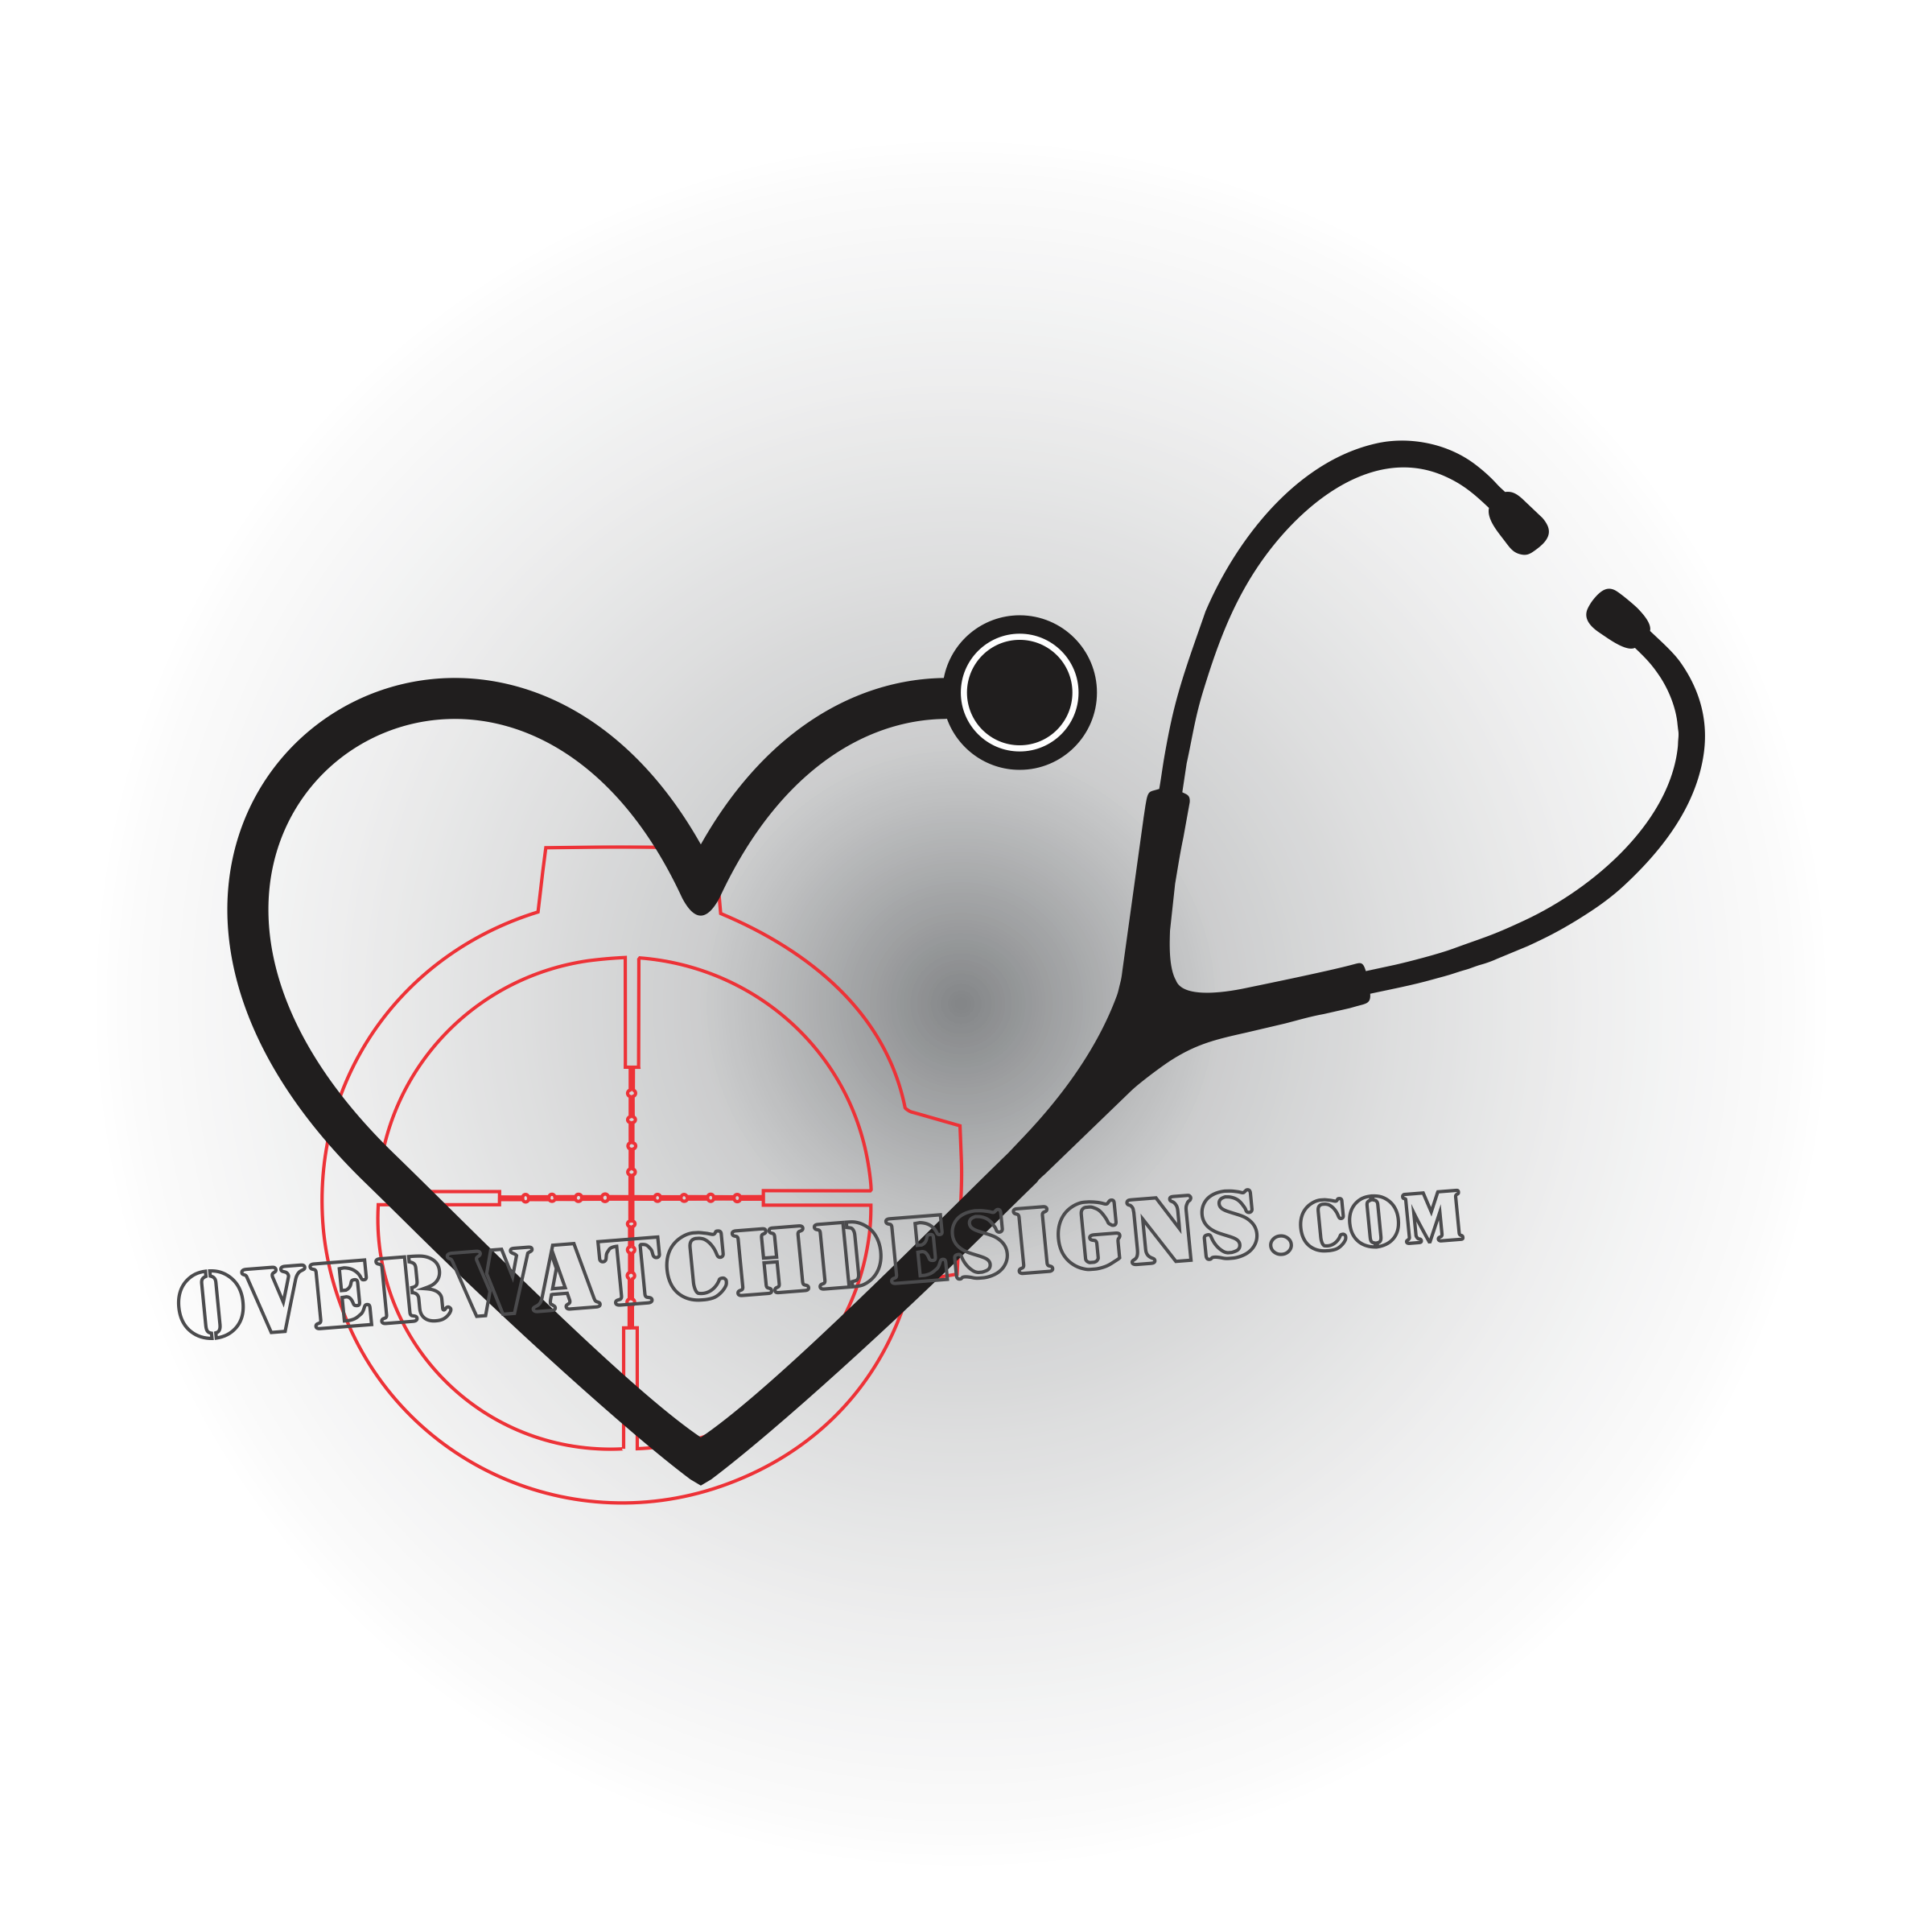 Heart Cut Sticker by Tecnocorp for iOS & Android